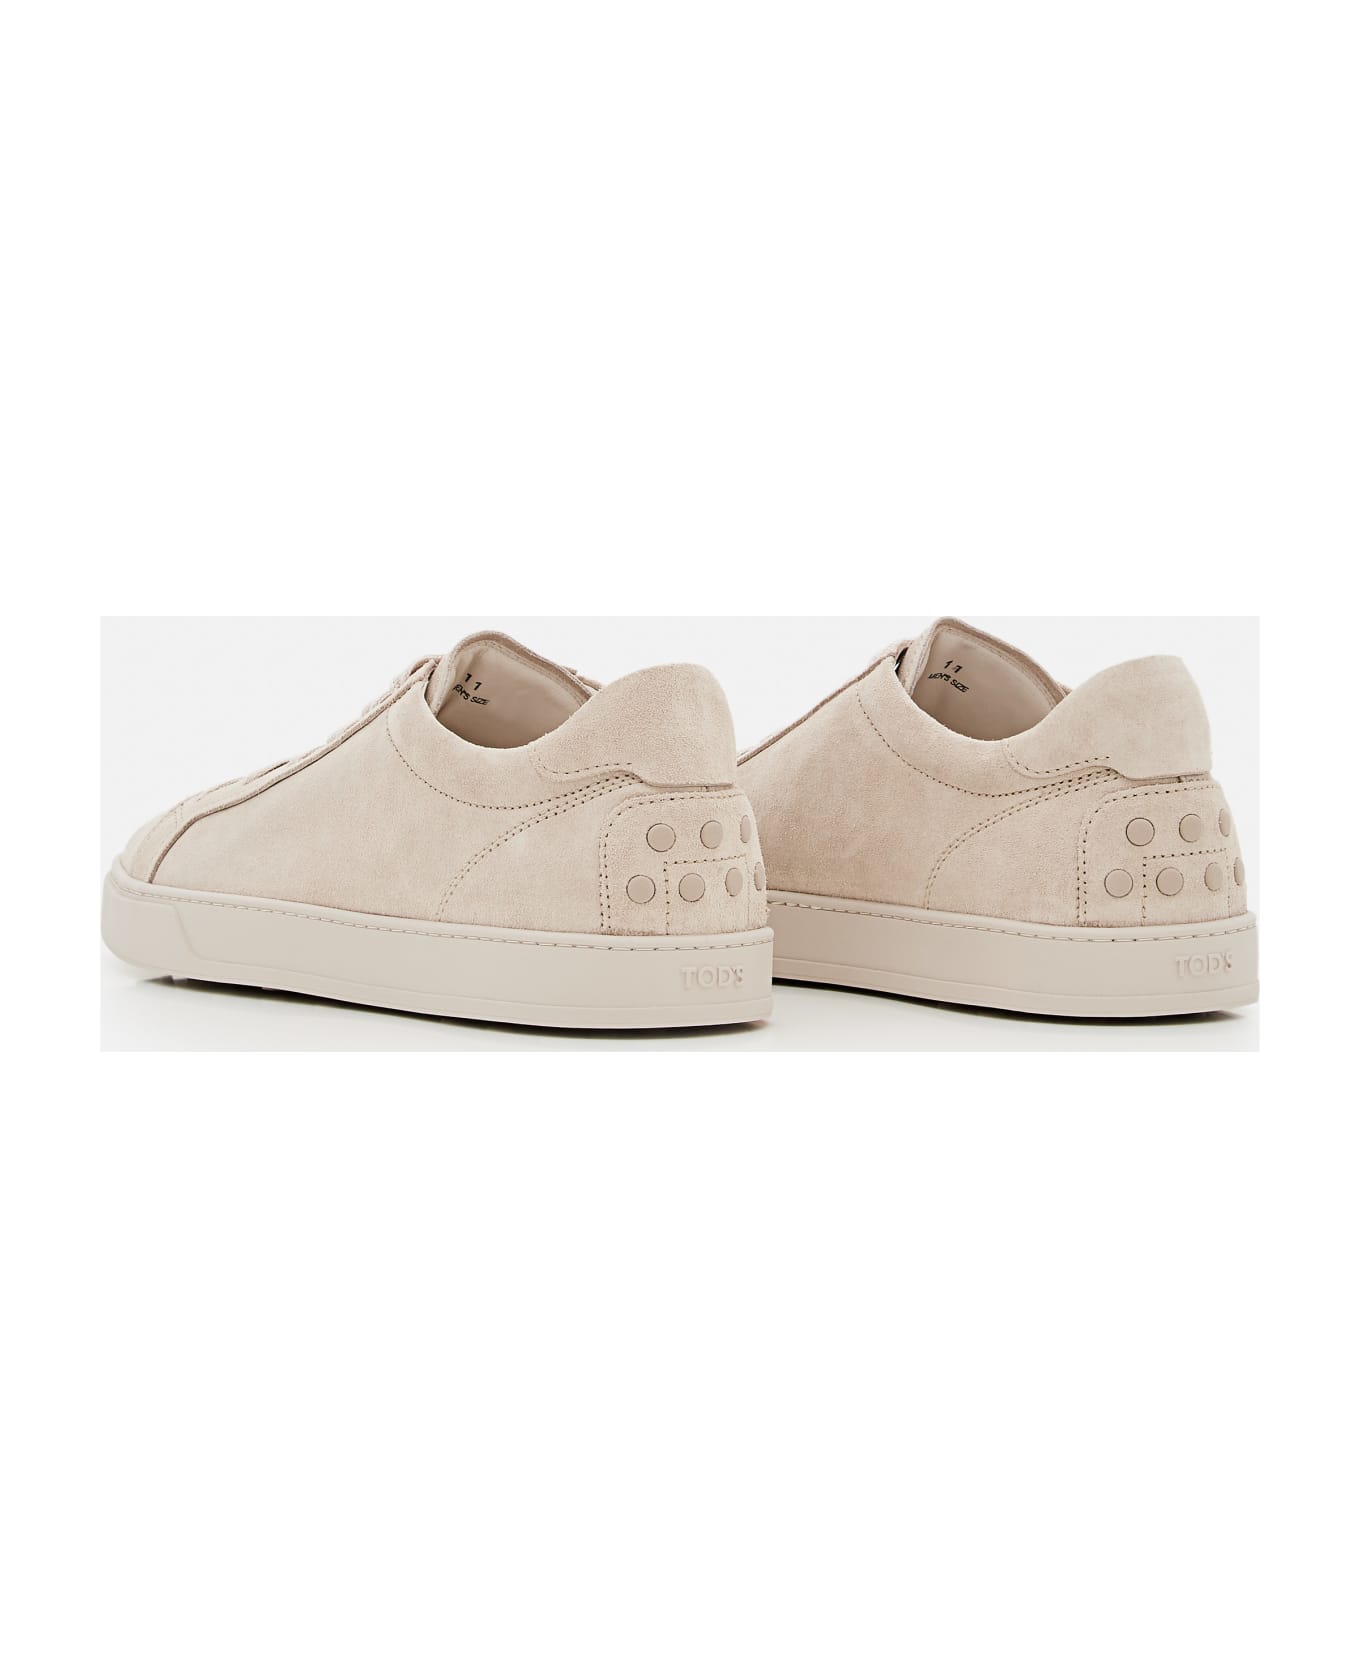 Tod's Lace Up Sneakers - Light bEIGE